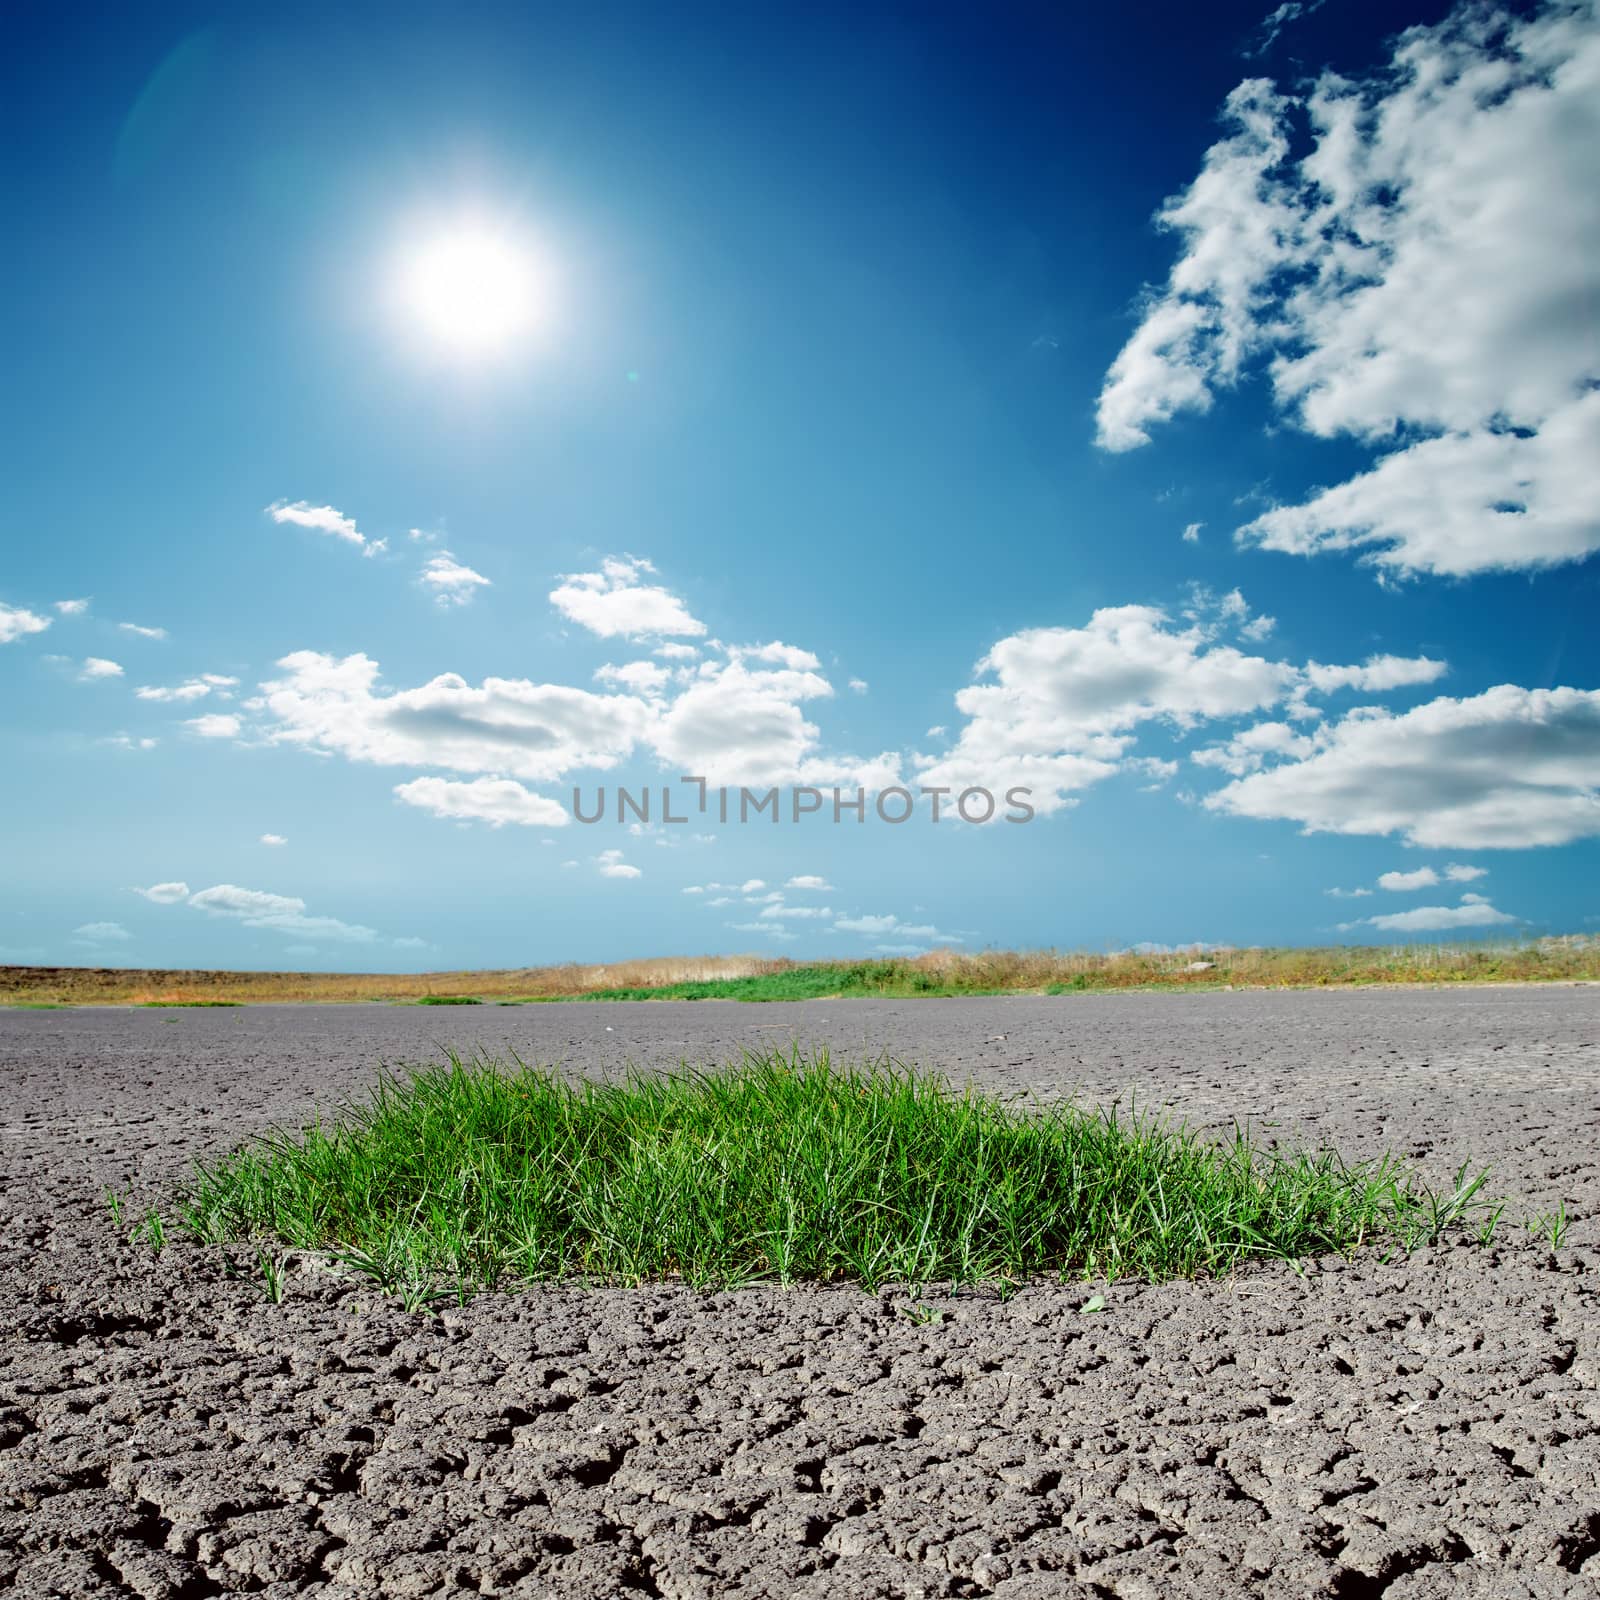 cracked earth with green grass and deep blue sky over it